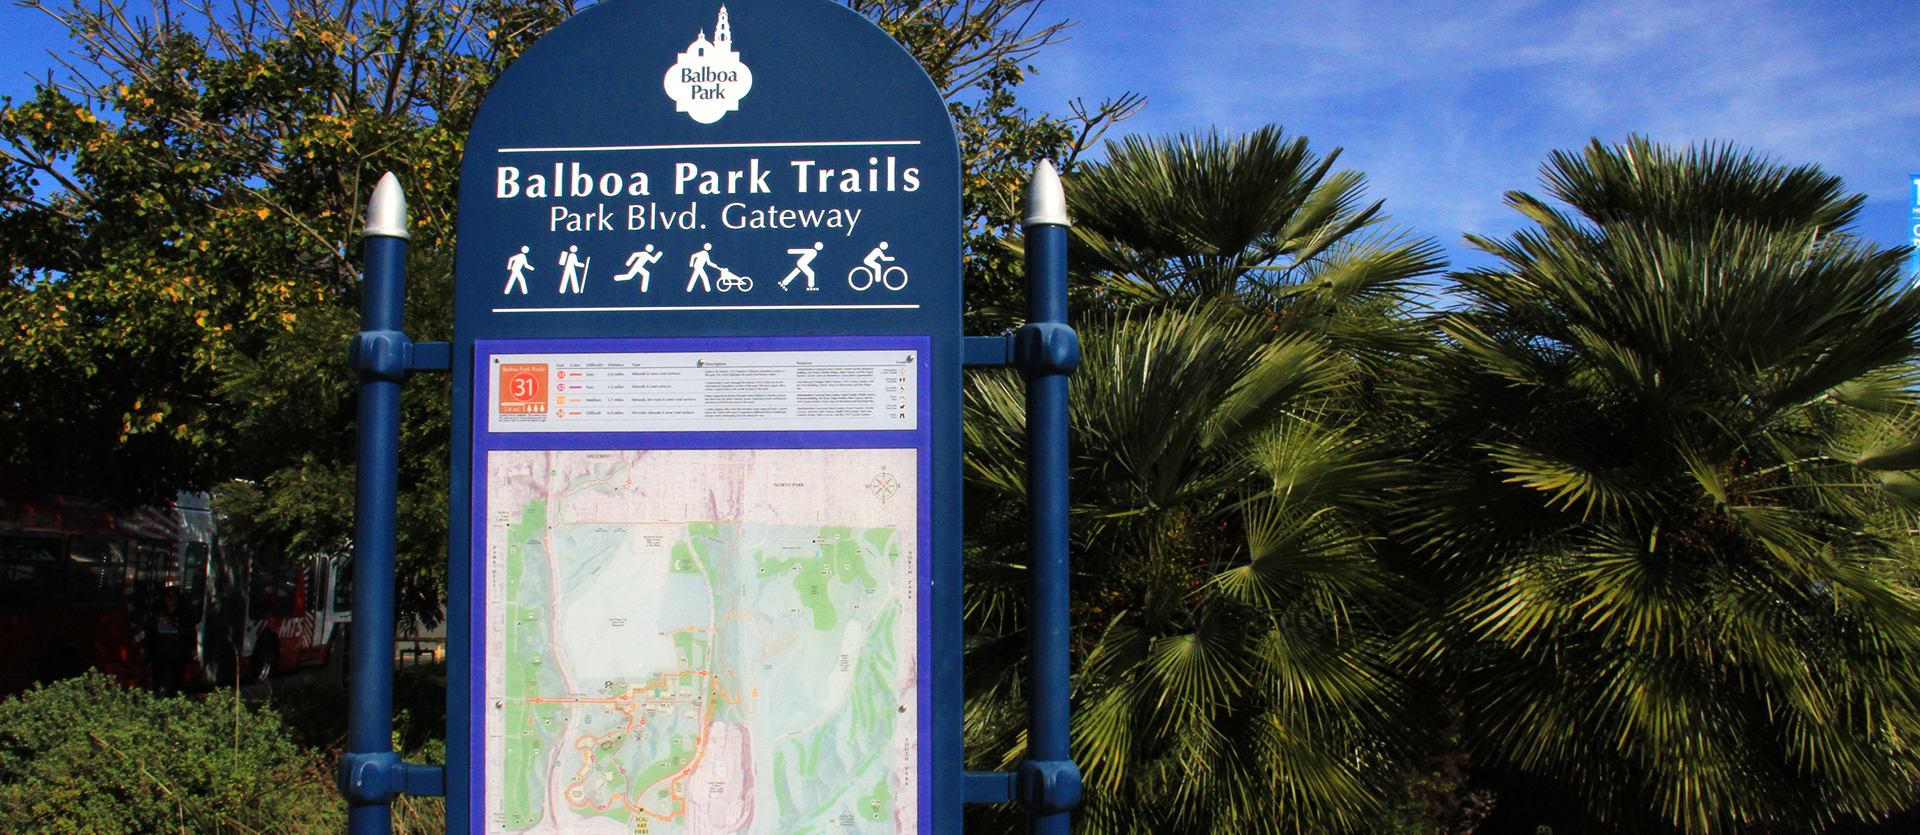 Balboa Park Trails sign for Park Blvd Gateway with a trail map and legend. Trees and blue sky are in the background.